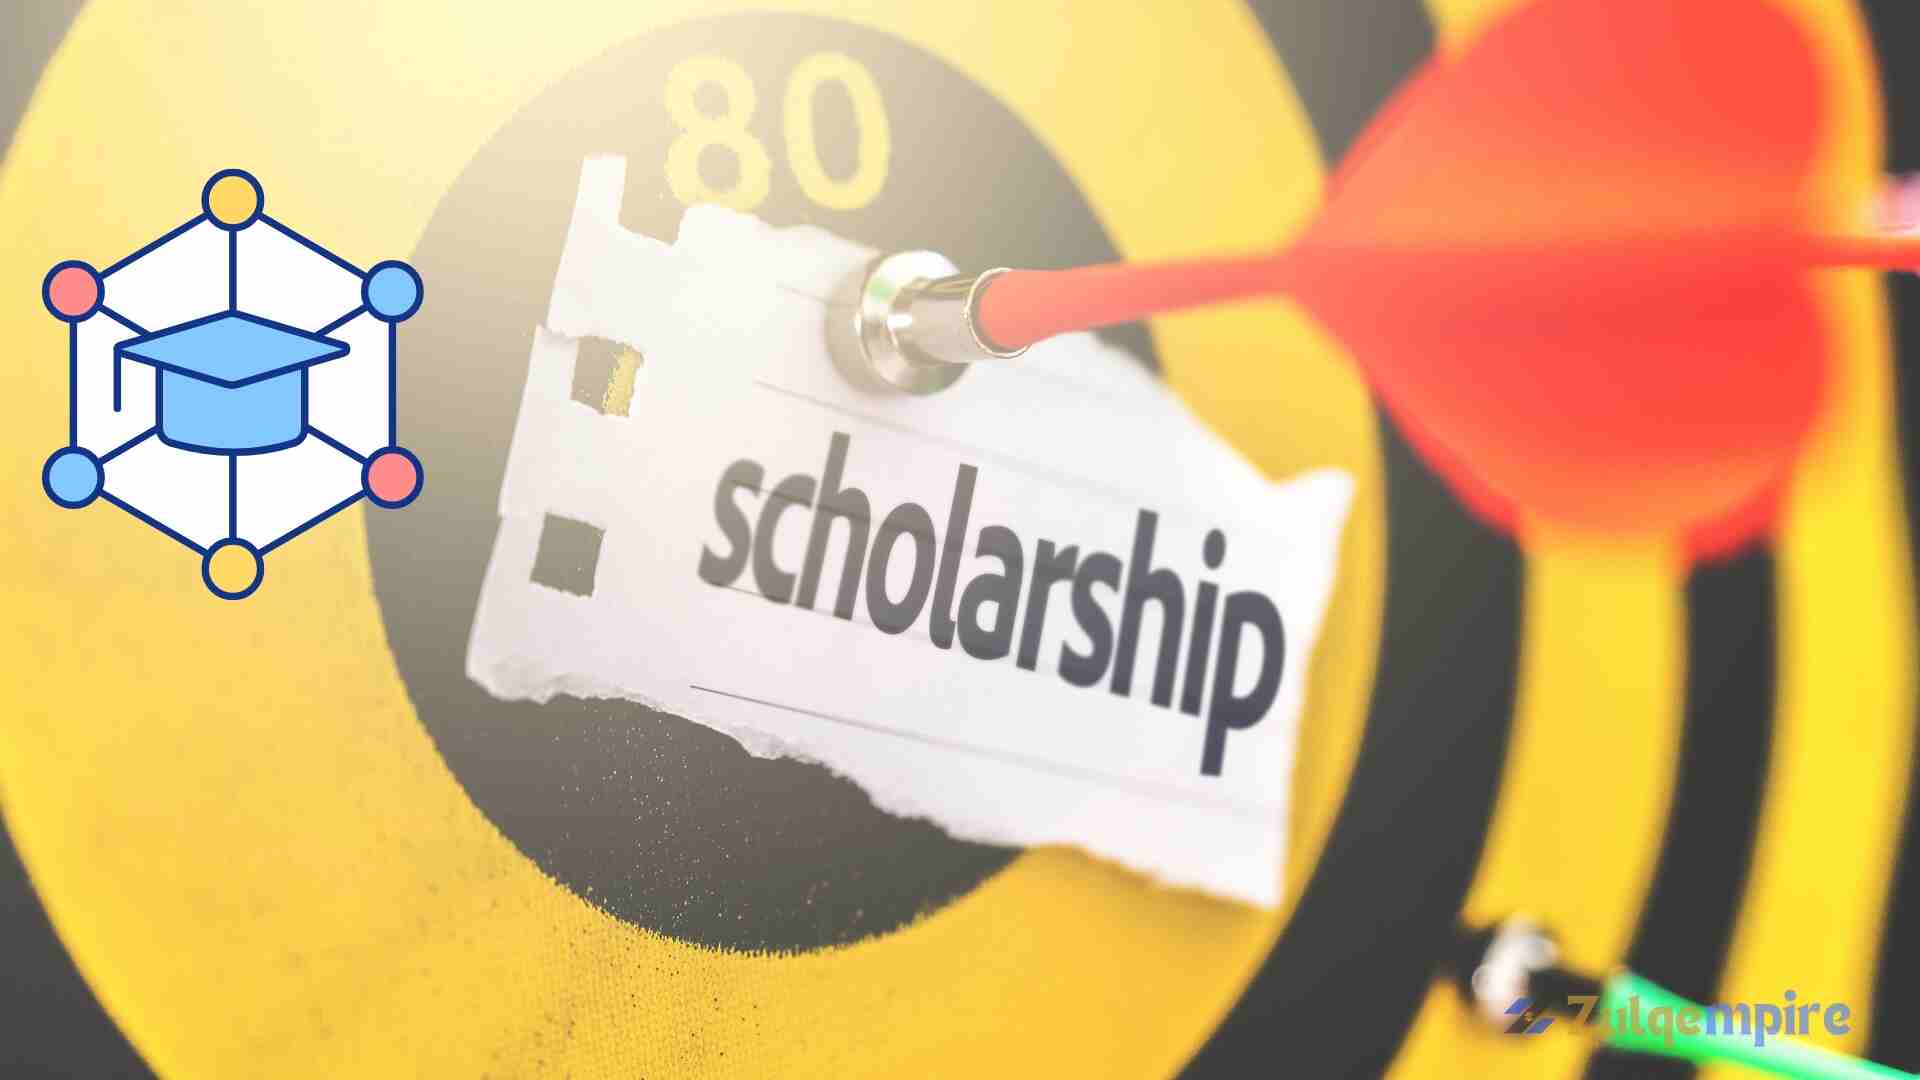 Continued from Part 1: More Scholarship Opportunities